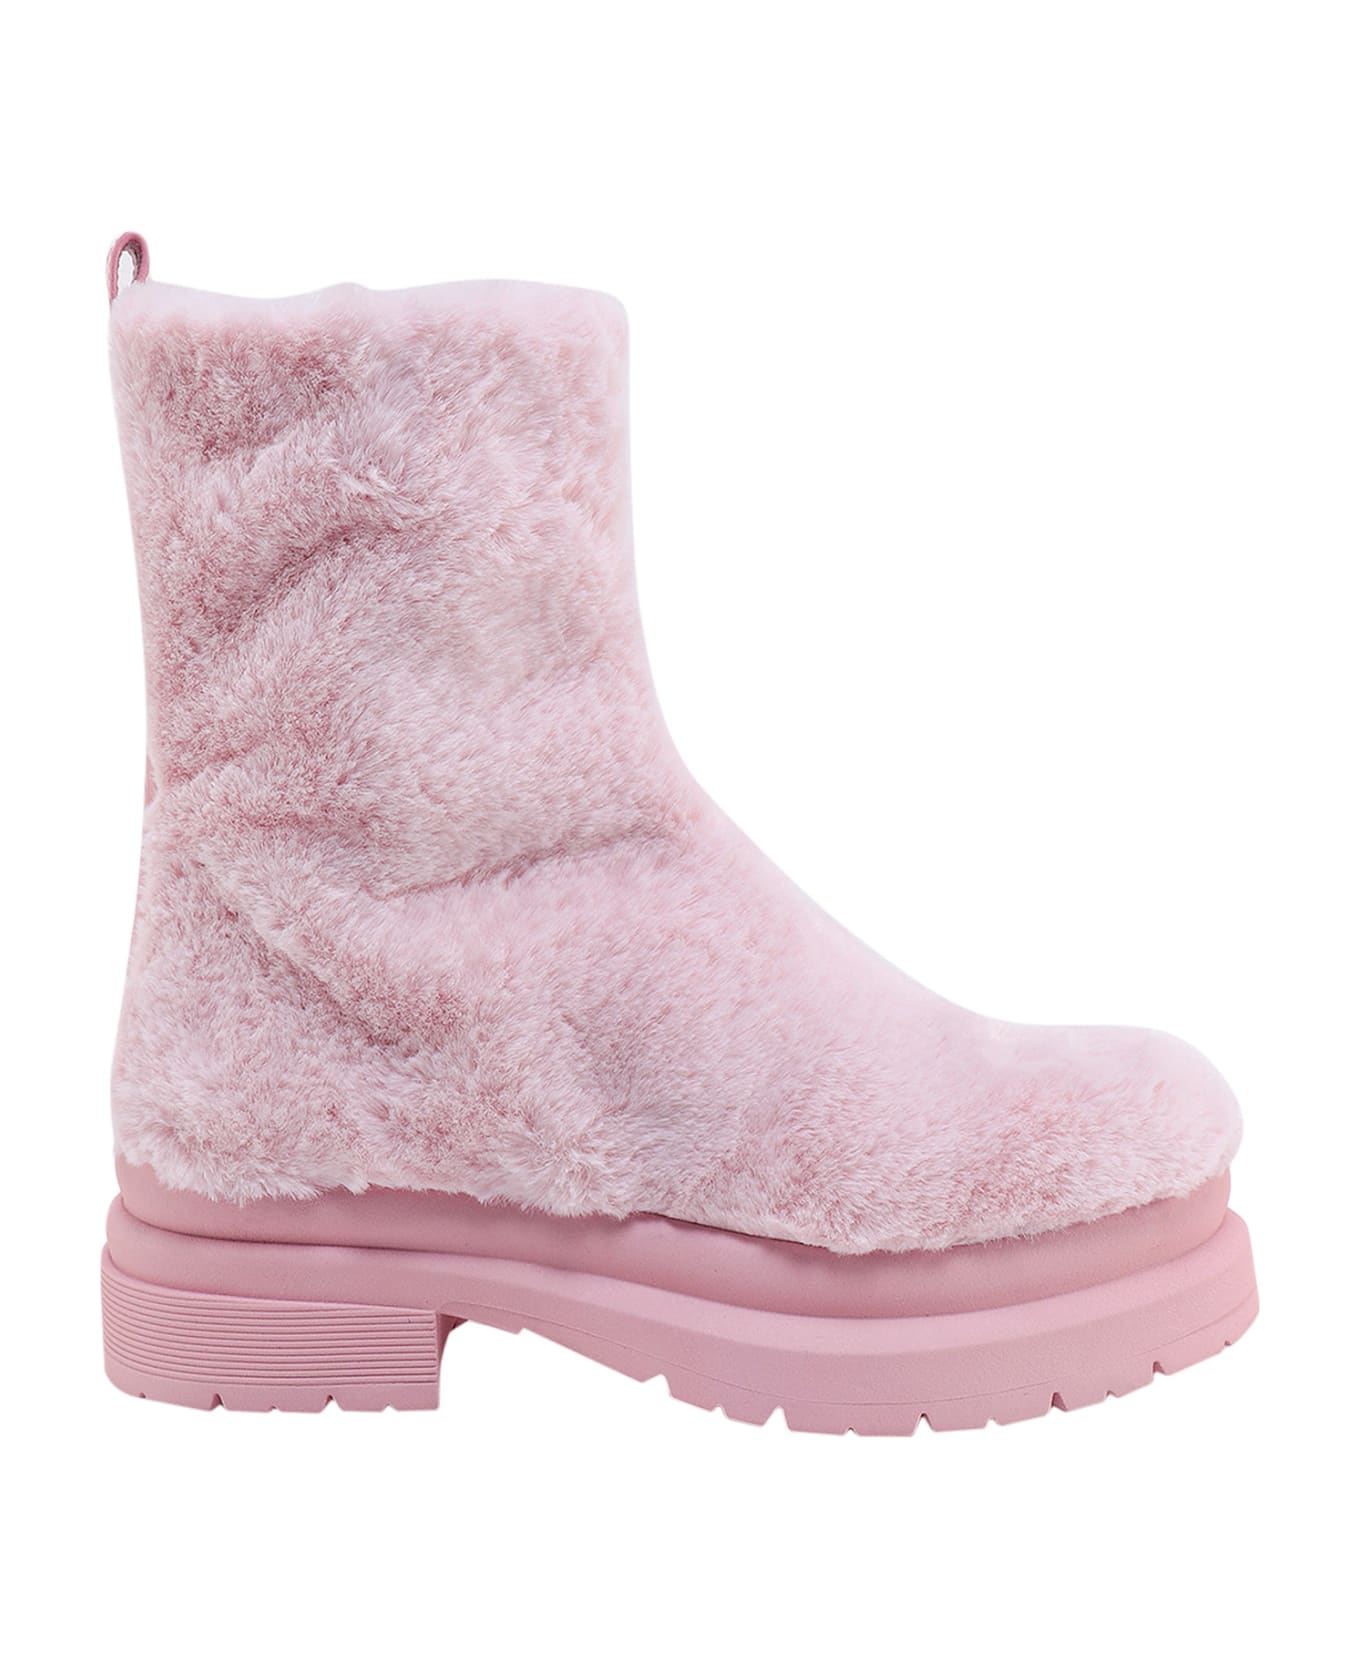 J.W. Anderson Boots - Pink